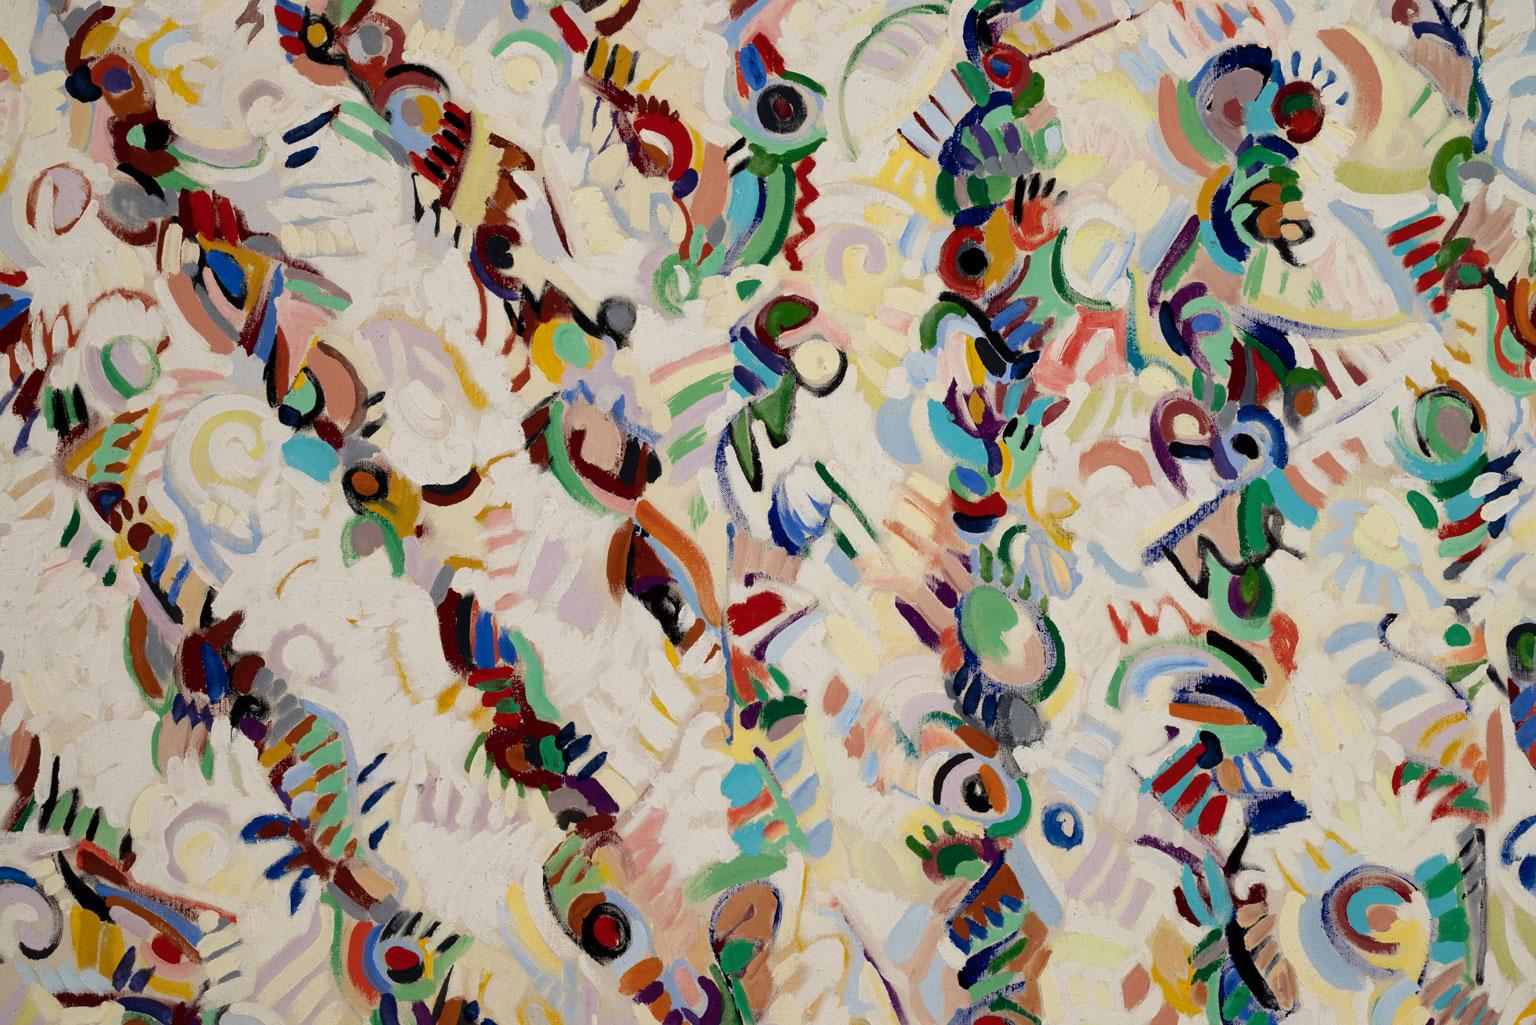 Untitled Abstract, an original oil on canvas by Edward Gilliam, is a piece for the true collector. Gilliam's use of color and paint thickness immediately captivates the viewer. It is very difficult to do the piece justice with 2-D images, but there